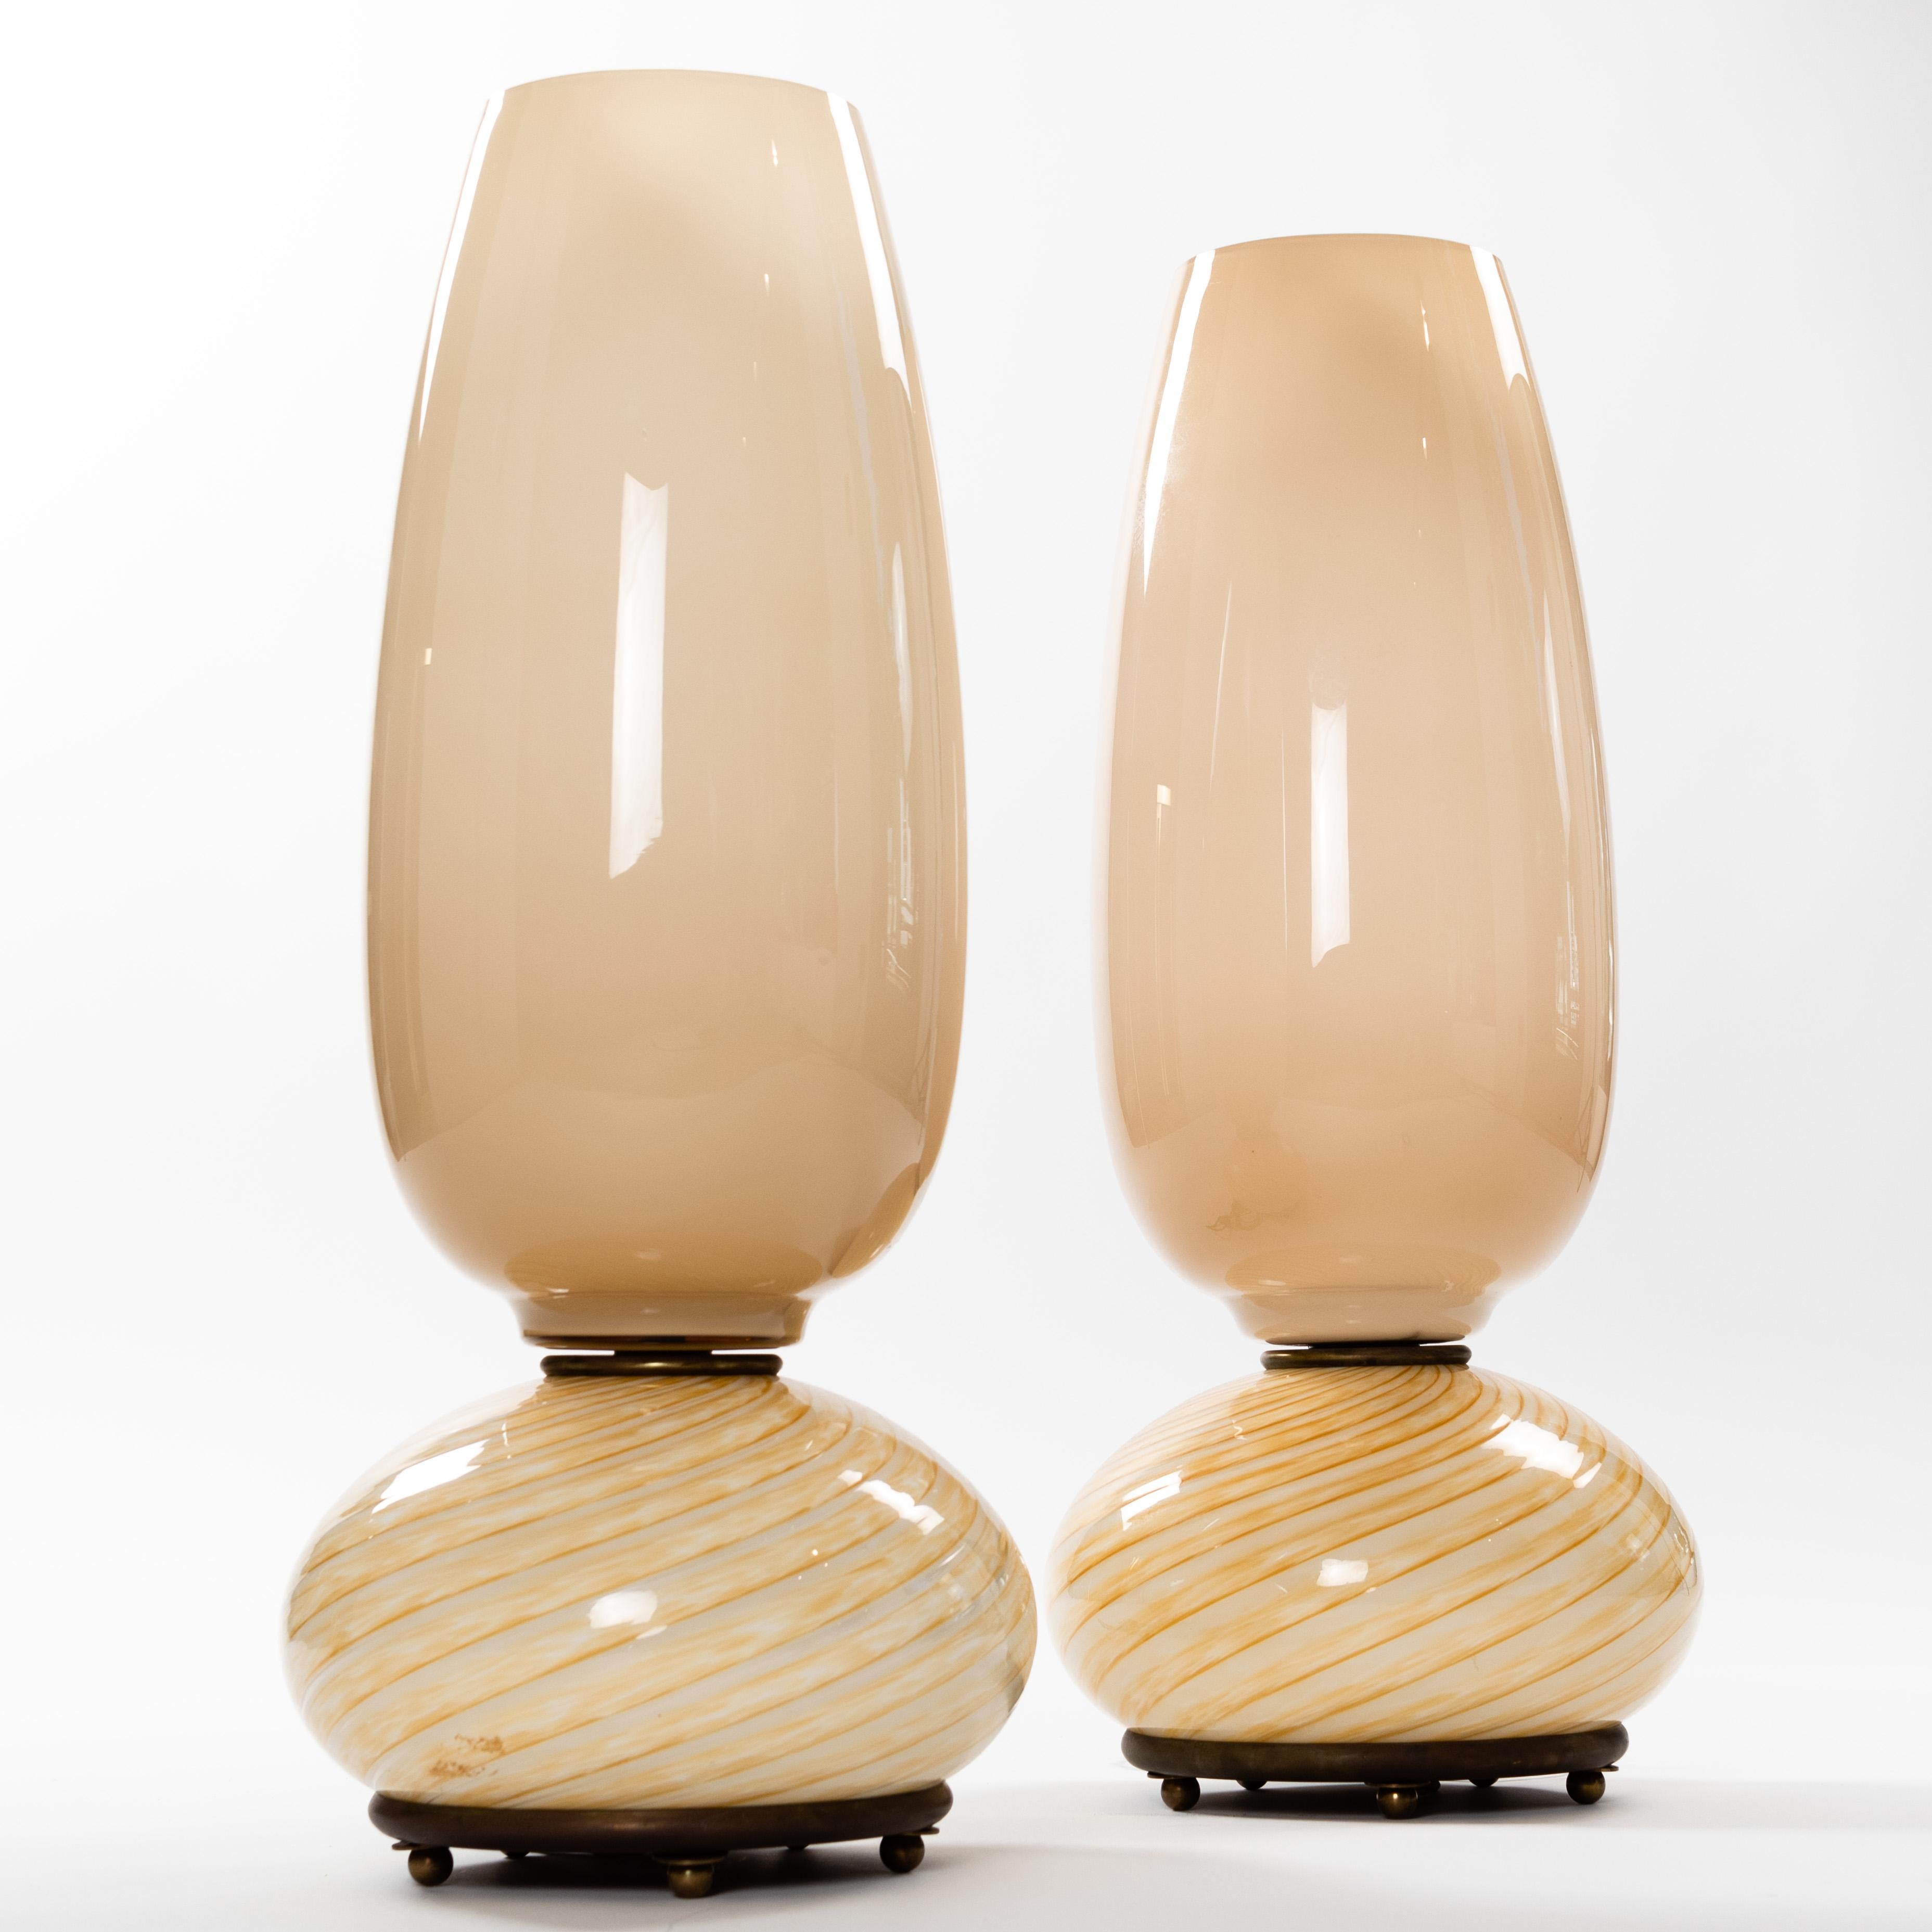 A wonderful and rare pair of Venini table lamps from the late 1970s.
Delicate camel-colored Murano glass give the objects a soft tone. 
The spiral glass base rests on a bronze plate with small bronze feet. The interior of the screen is off-white